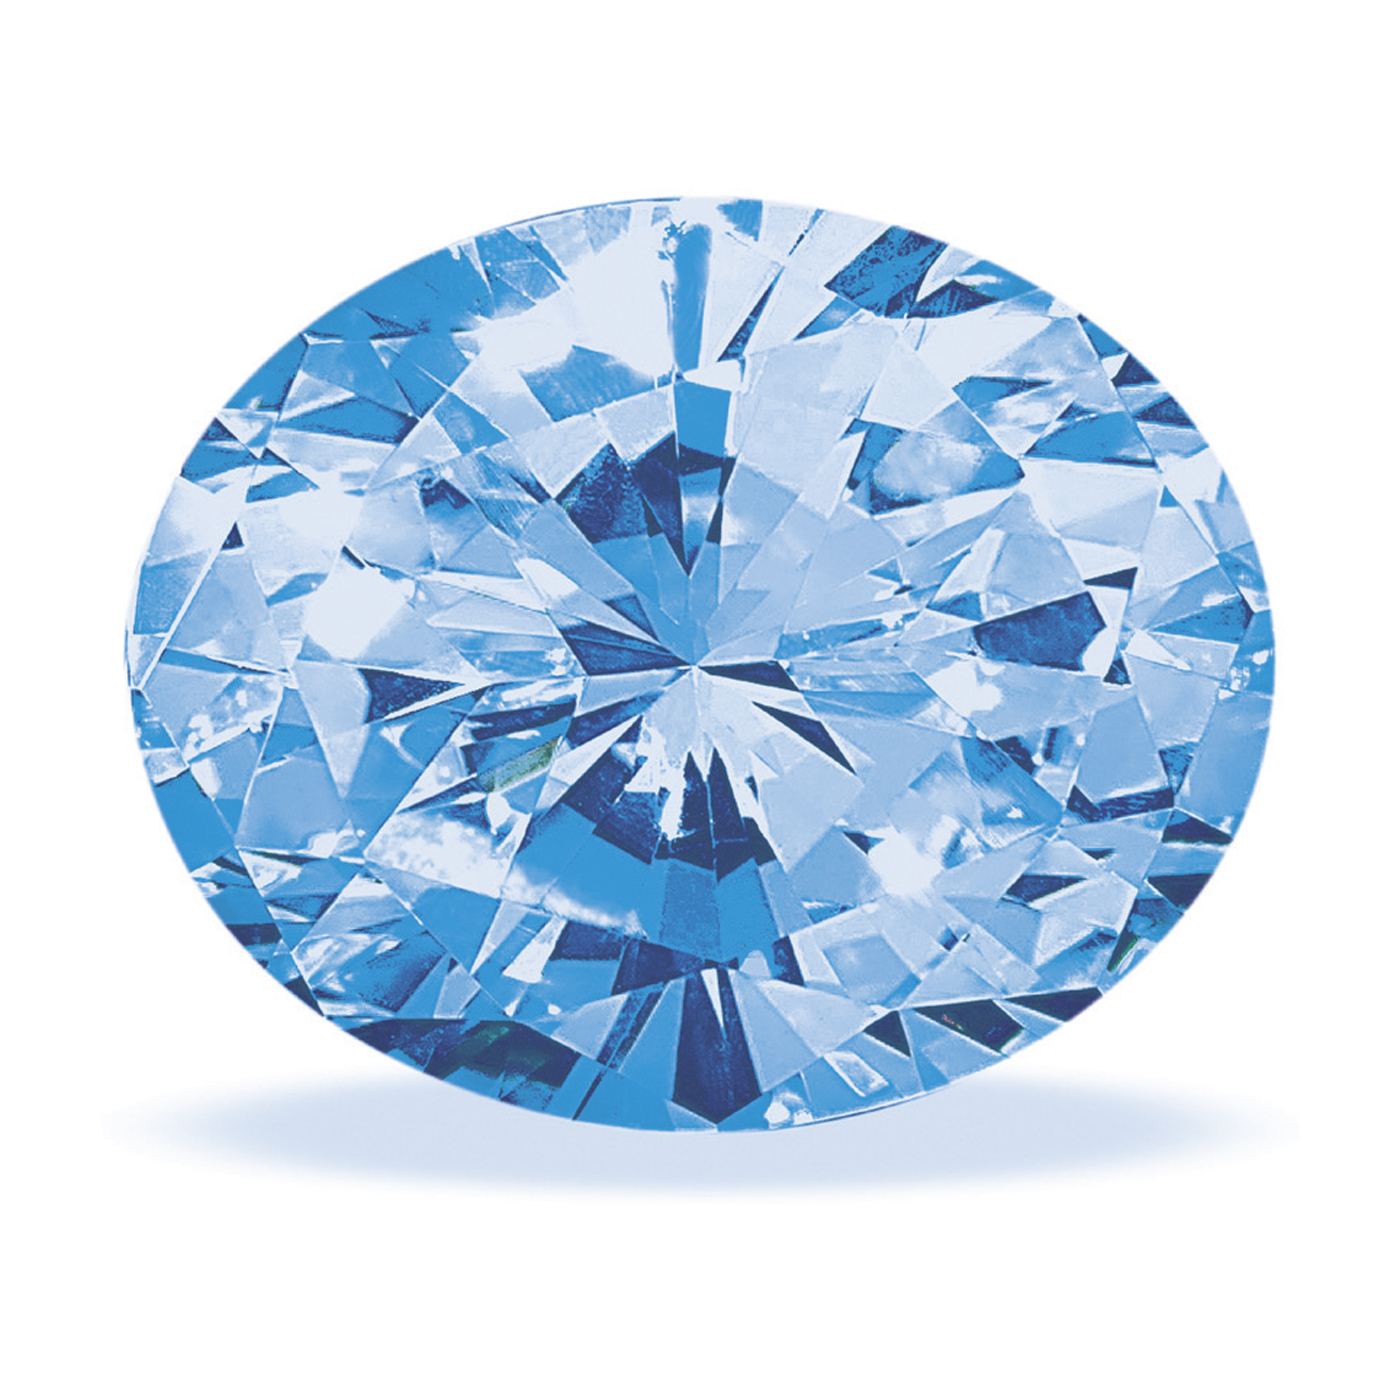 Topaz, Oval, Ice Blue, Faceted, 5.00 x 3.00 mm - 1 piece